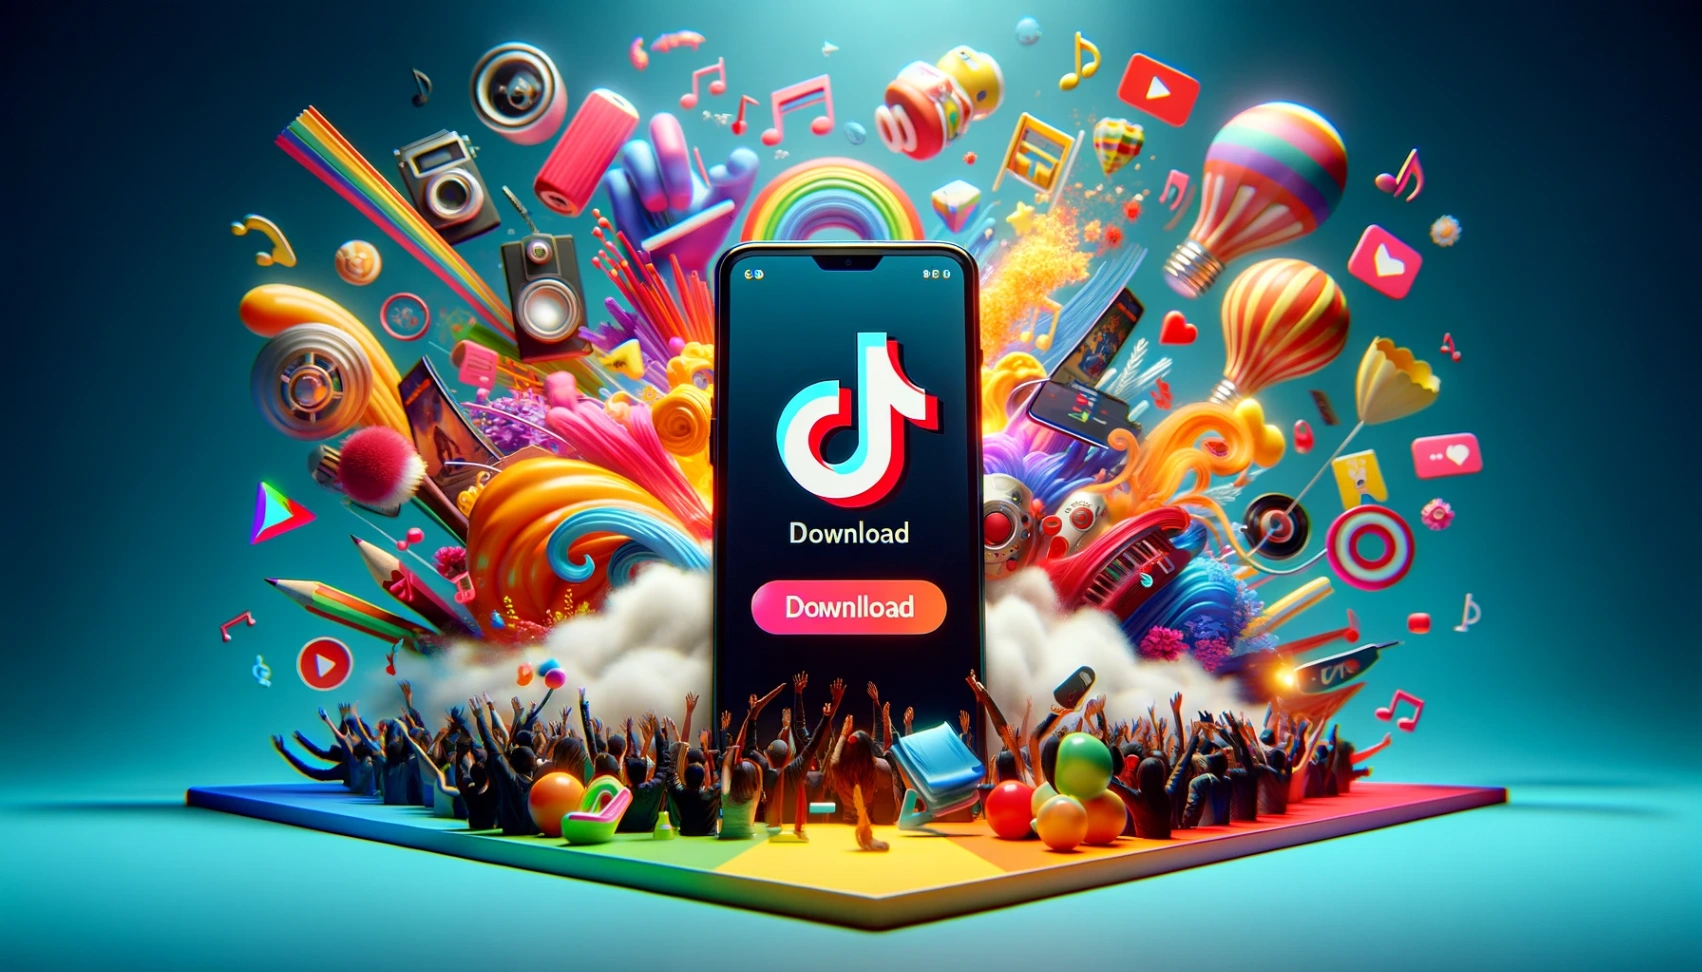 TikTok Videos for Free: Learn How to Download Step-by-Step